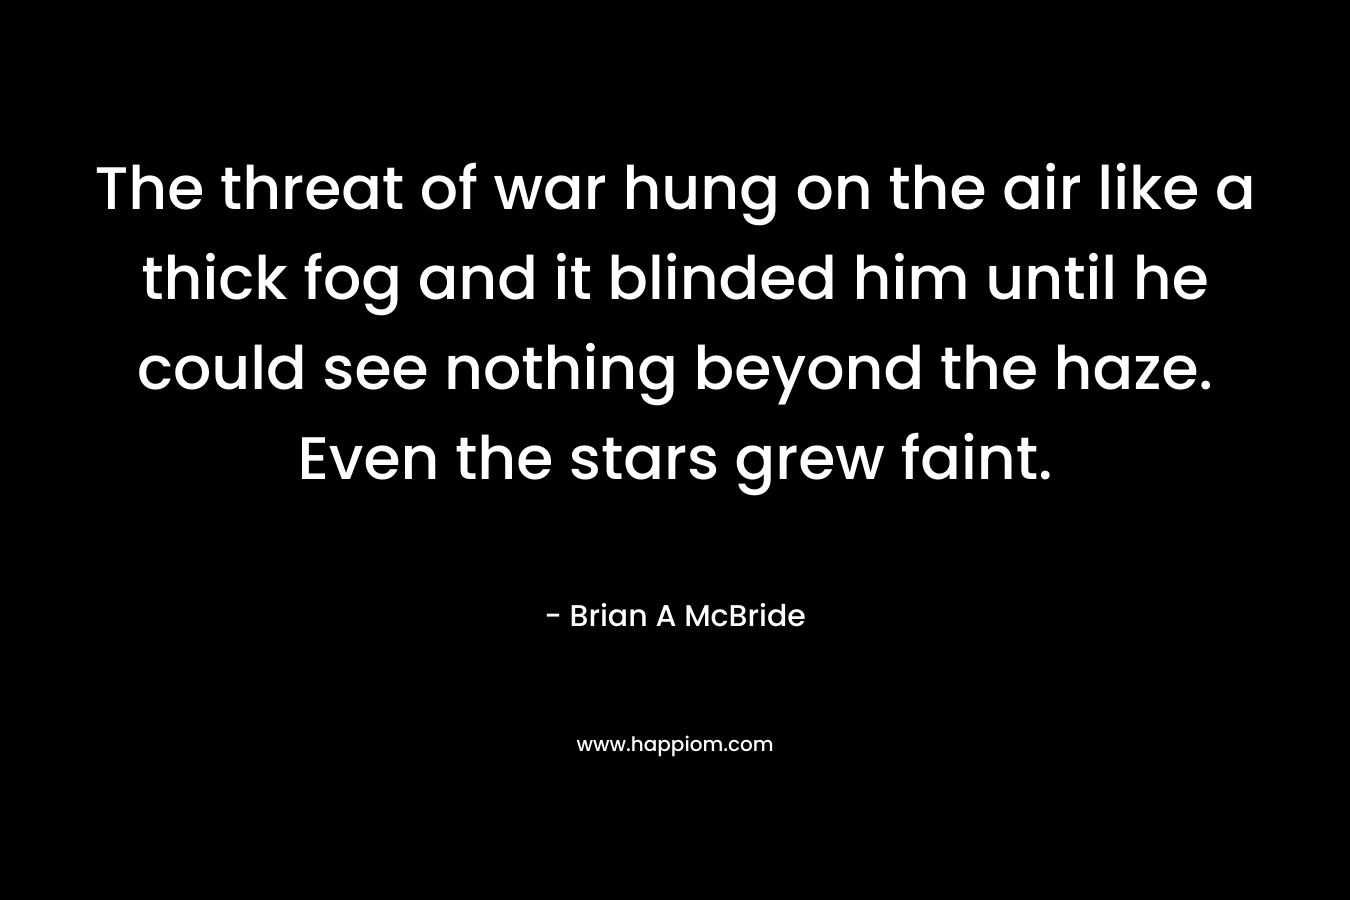 The threat of war hung on the air like a thick fog and it blinded him until he could see nothing beyond the haze. Even the stars grew faint. – Brian A McBride